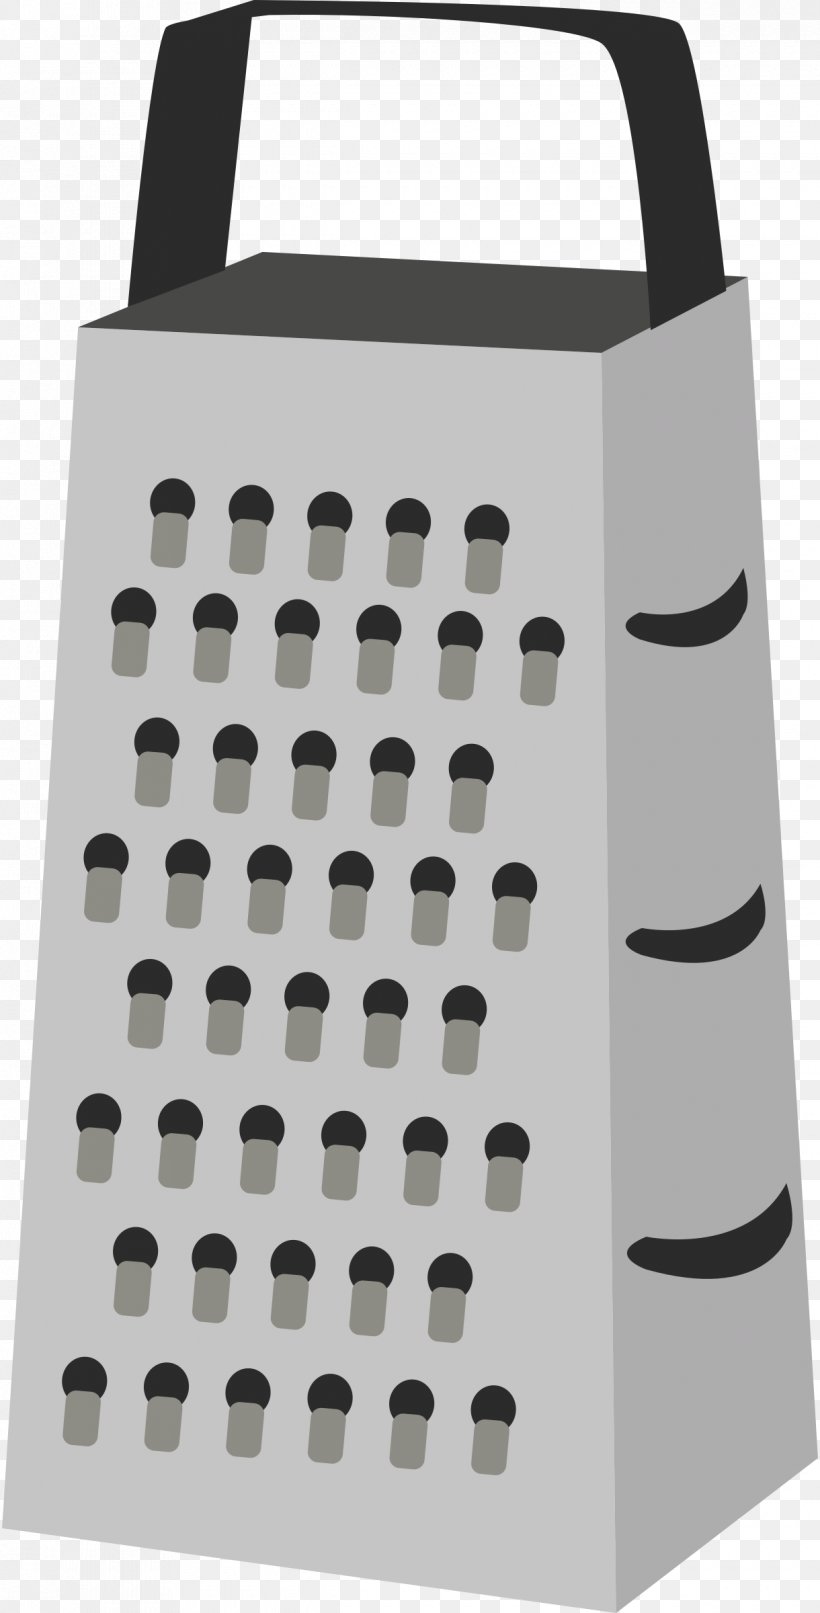 Grater Kitchen Utensil Stock Photography, PNG, 1220x2400px, Grater, Kitchen, Kitchen Utensil, Metal, Royaltyfree Download Free